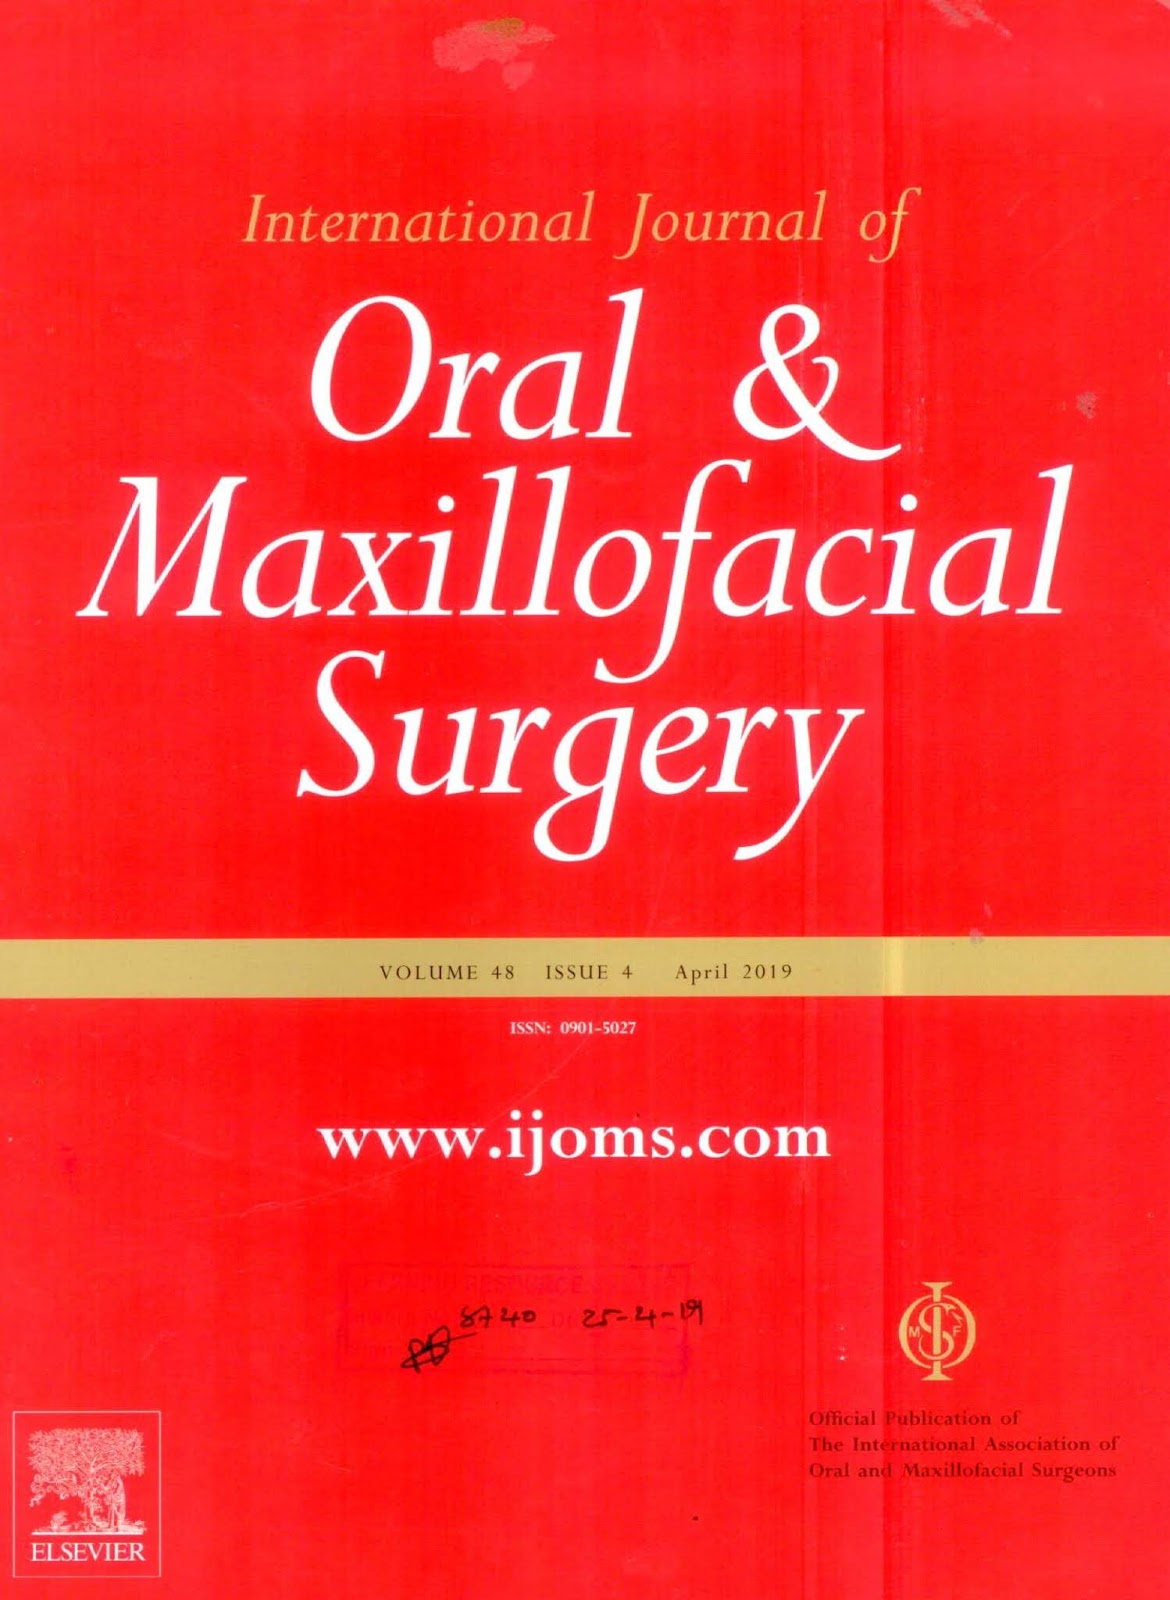 https://www.sciencedirect.com/journal/international-journal-of-oral-and-maxillofacial-surgery/vol/48/issue/4